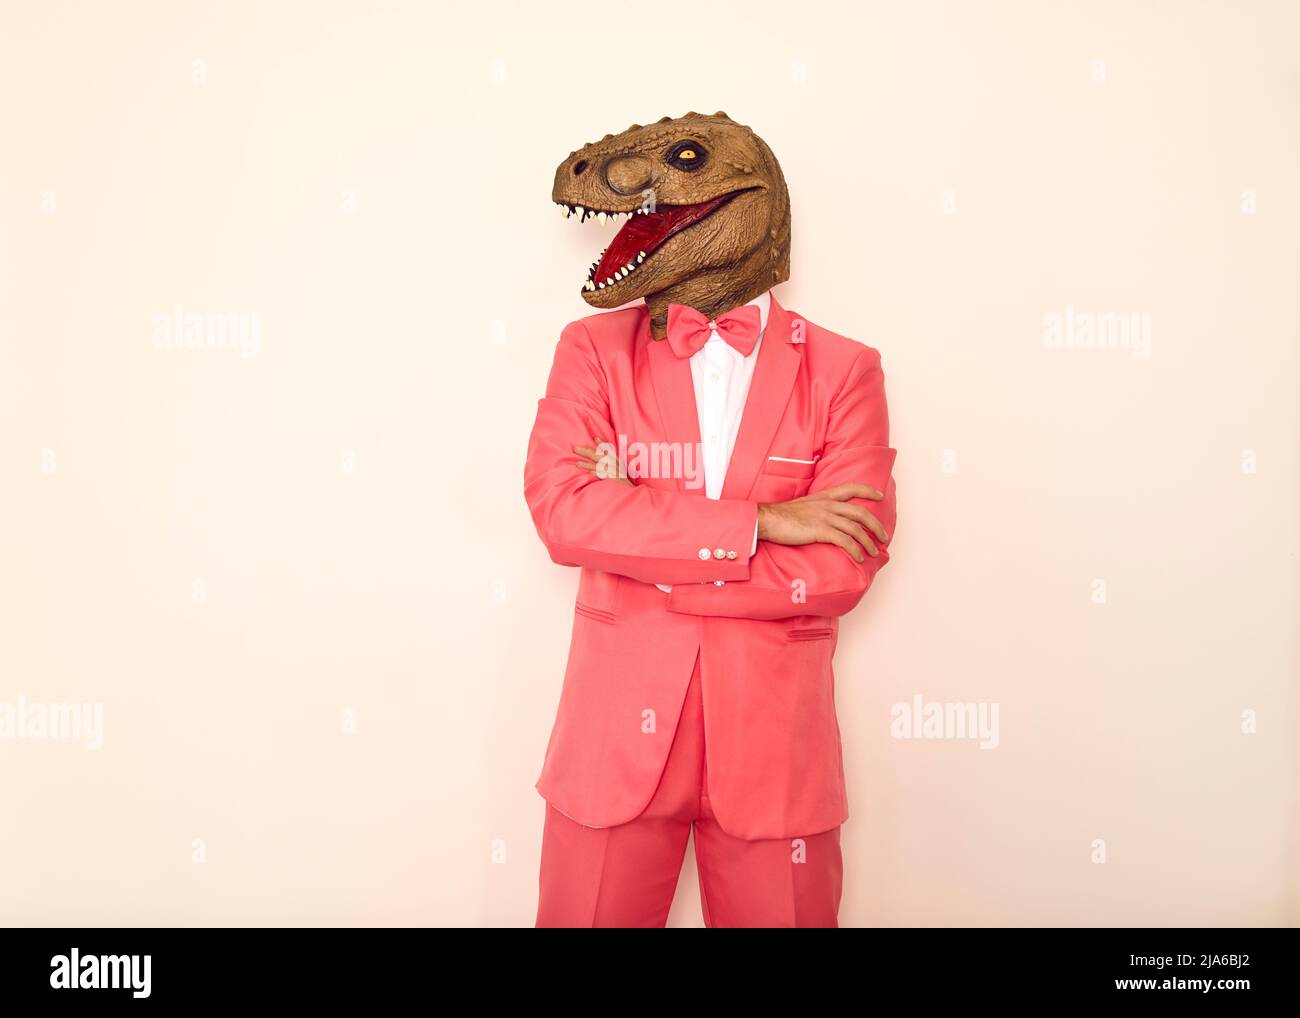 Strange guy in a pink suit and a funny dinosaur mask standing against a white background Stock Photo